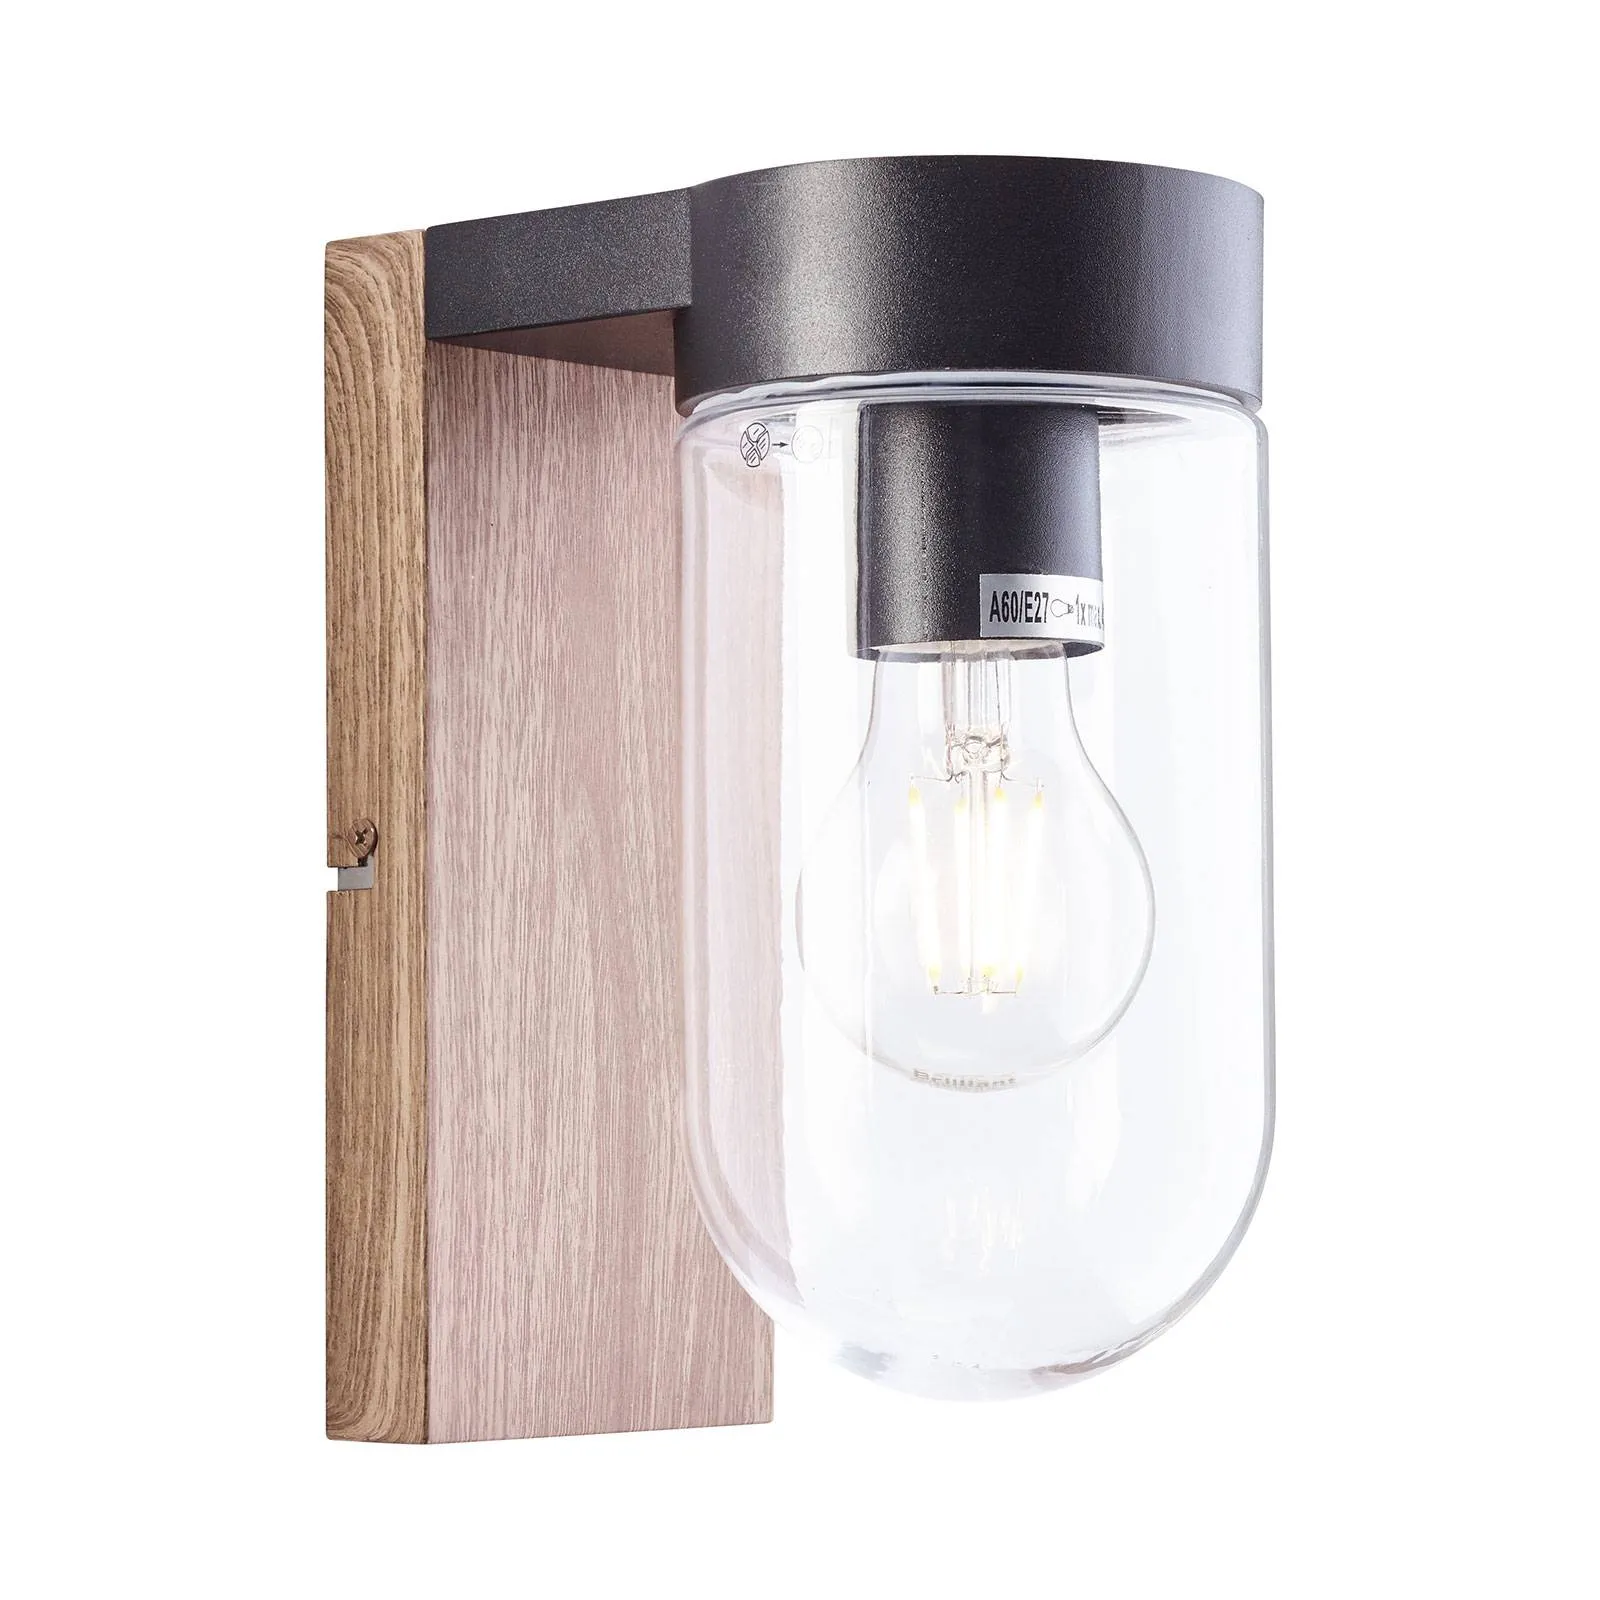 Cabar outdoor wall light in a wood look